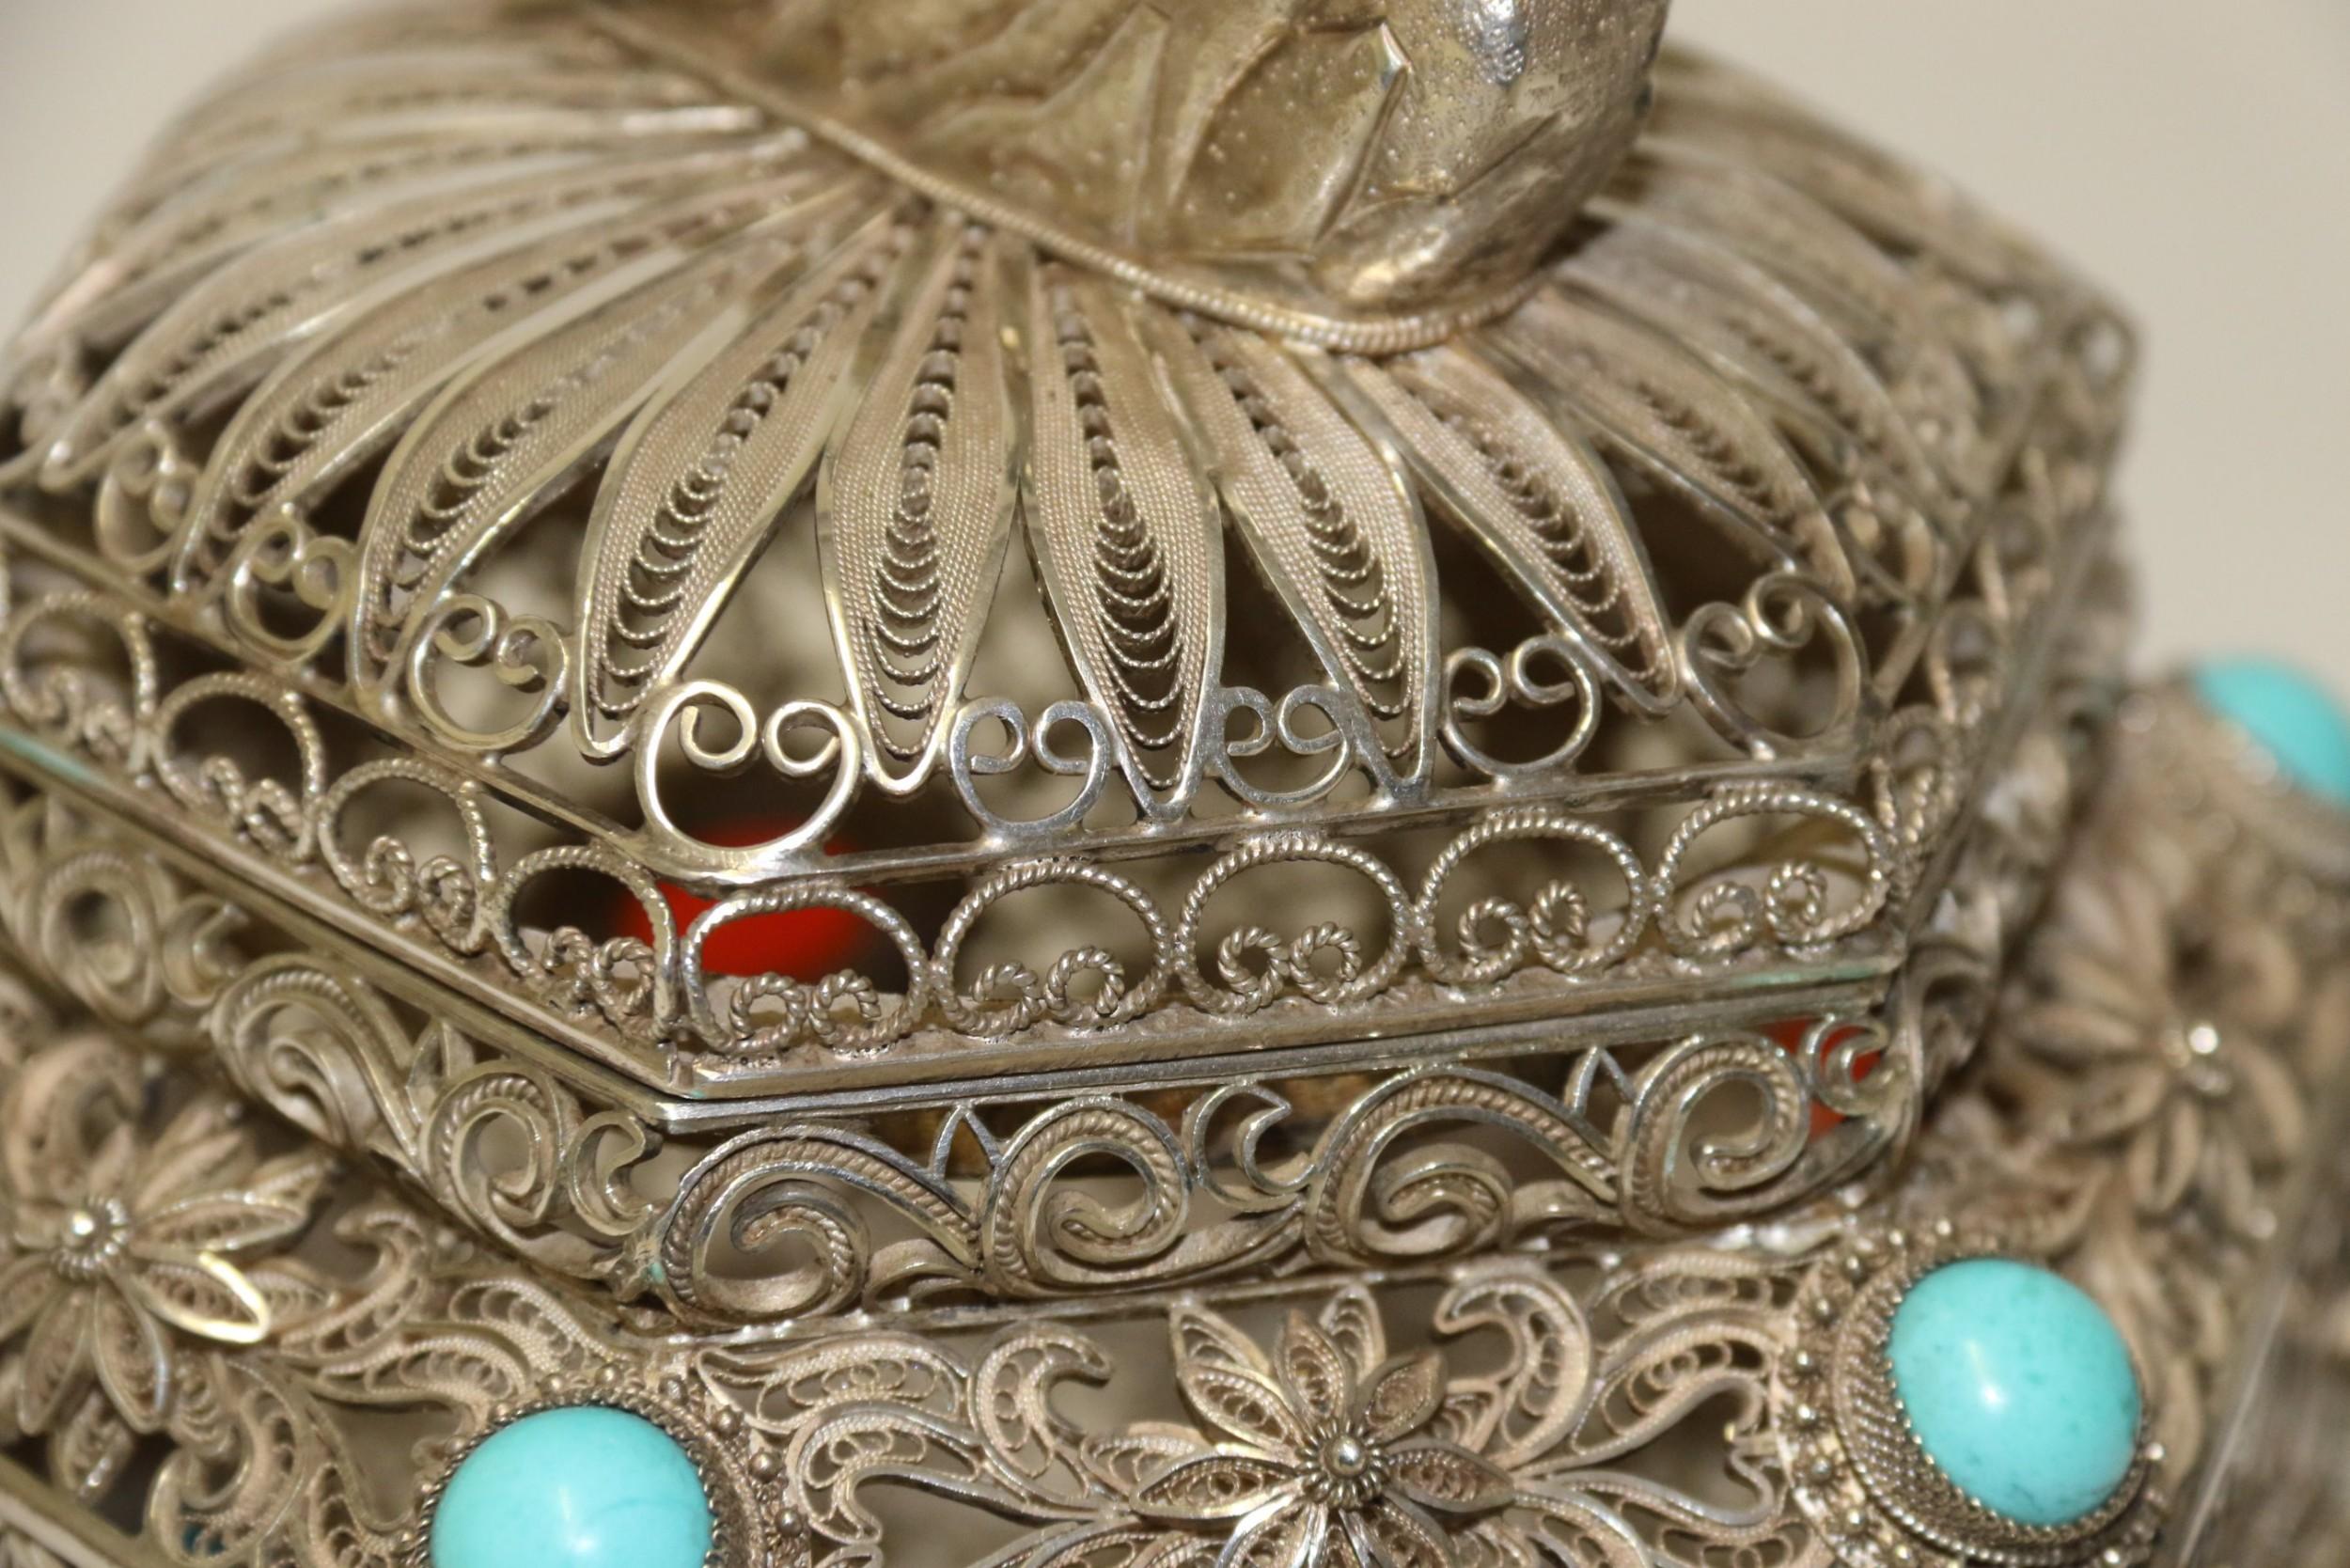 19th Century Indian Silver Filigree Work Incense Burner with Mounted Cabochons For Sale 8